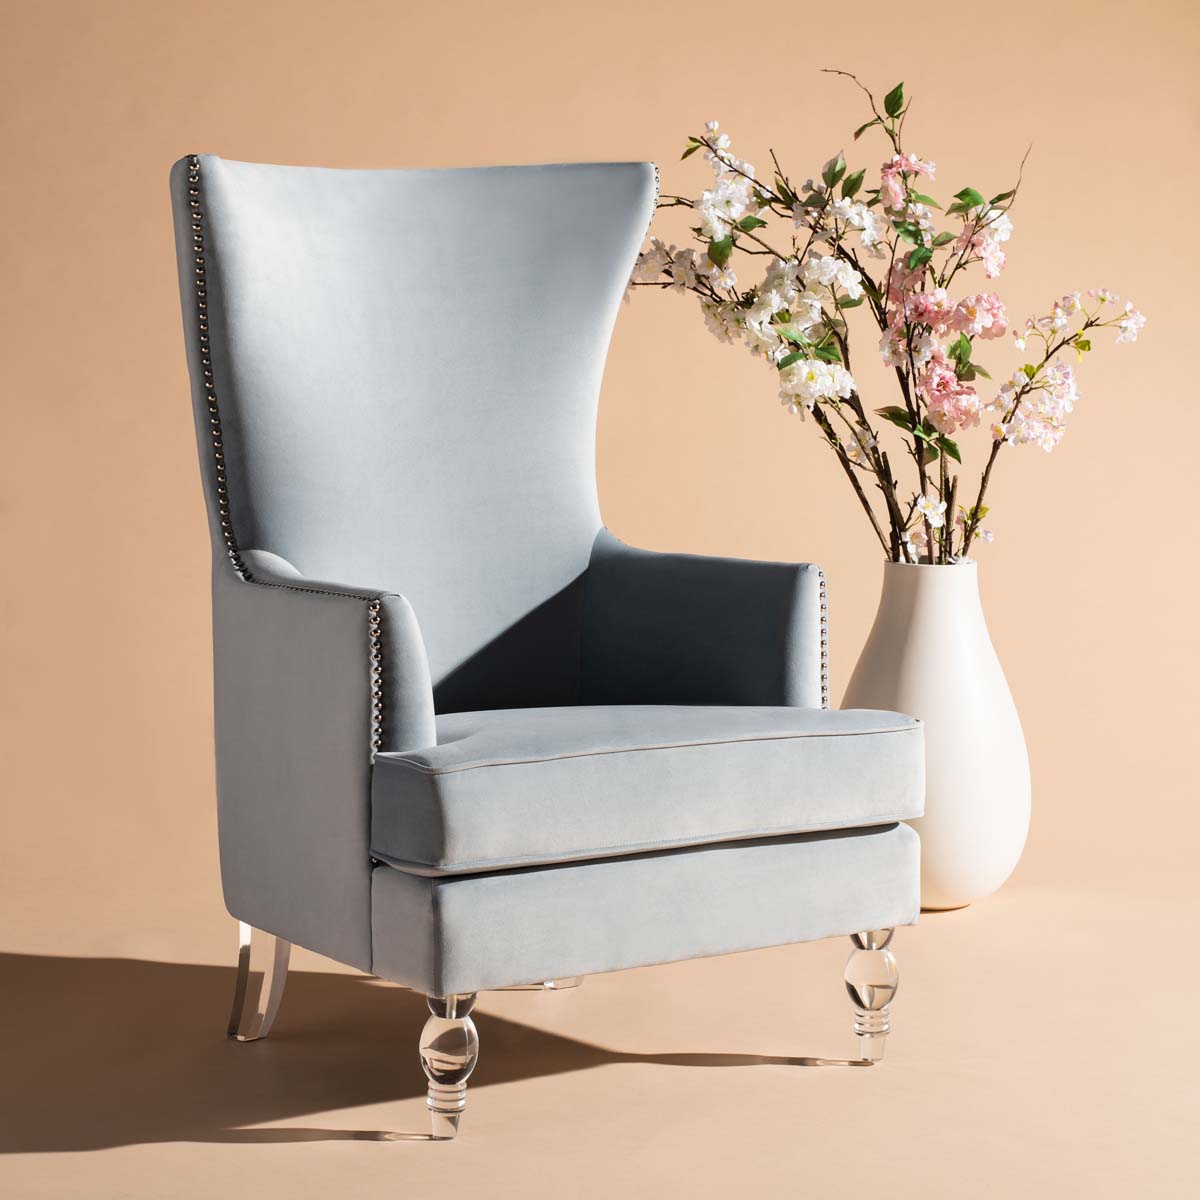 Safavieh Couture Geode Modern Wingback Chair - Light Silver